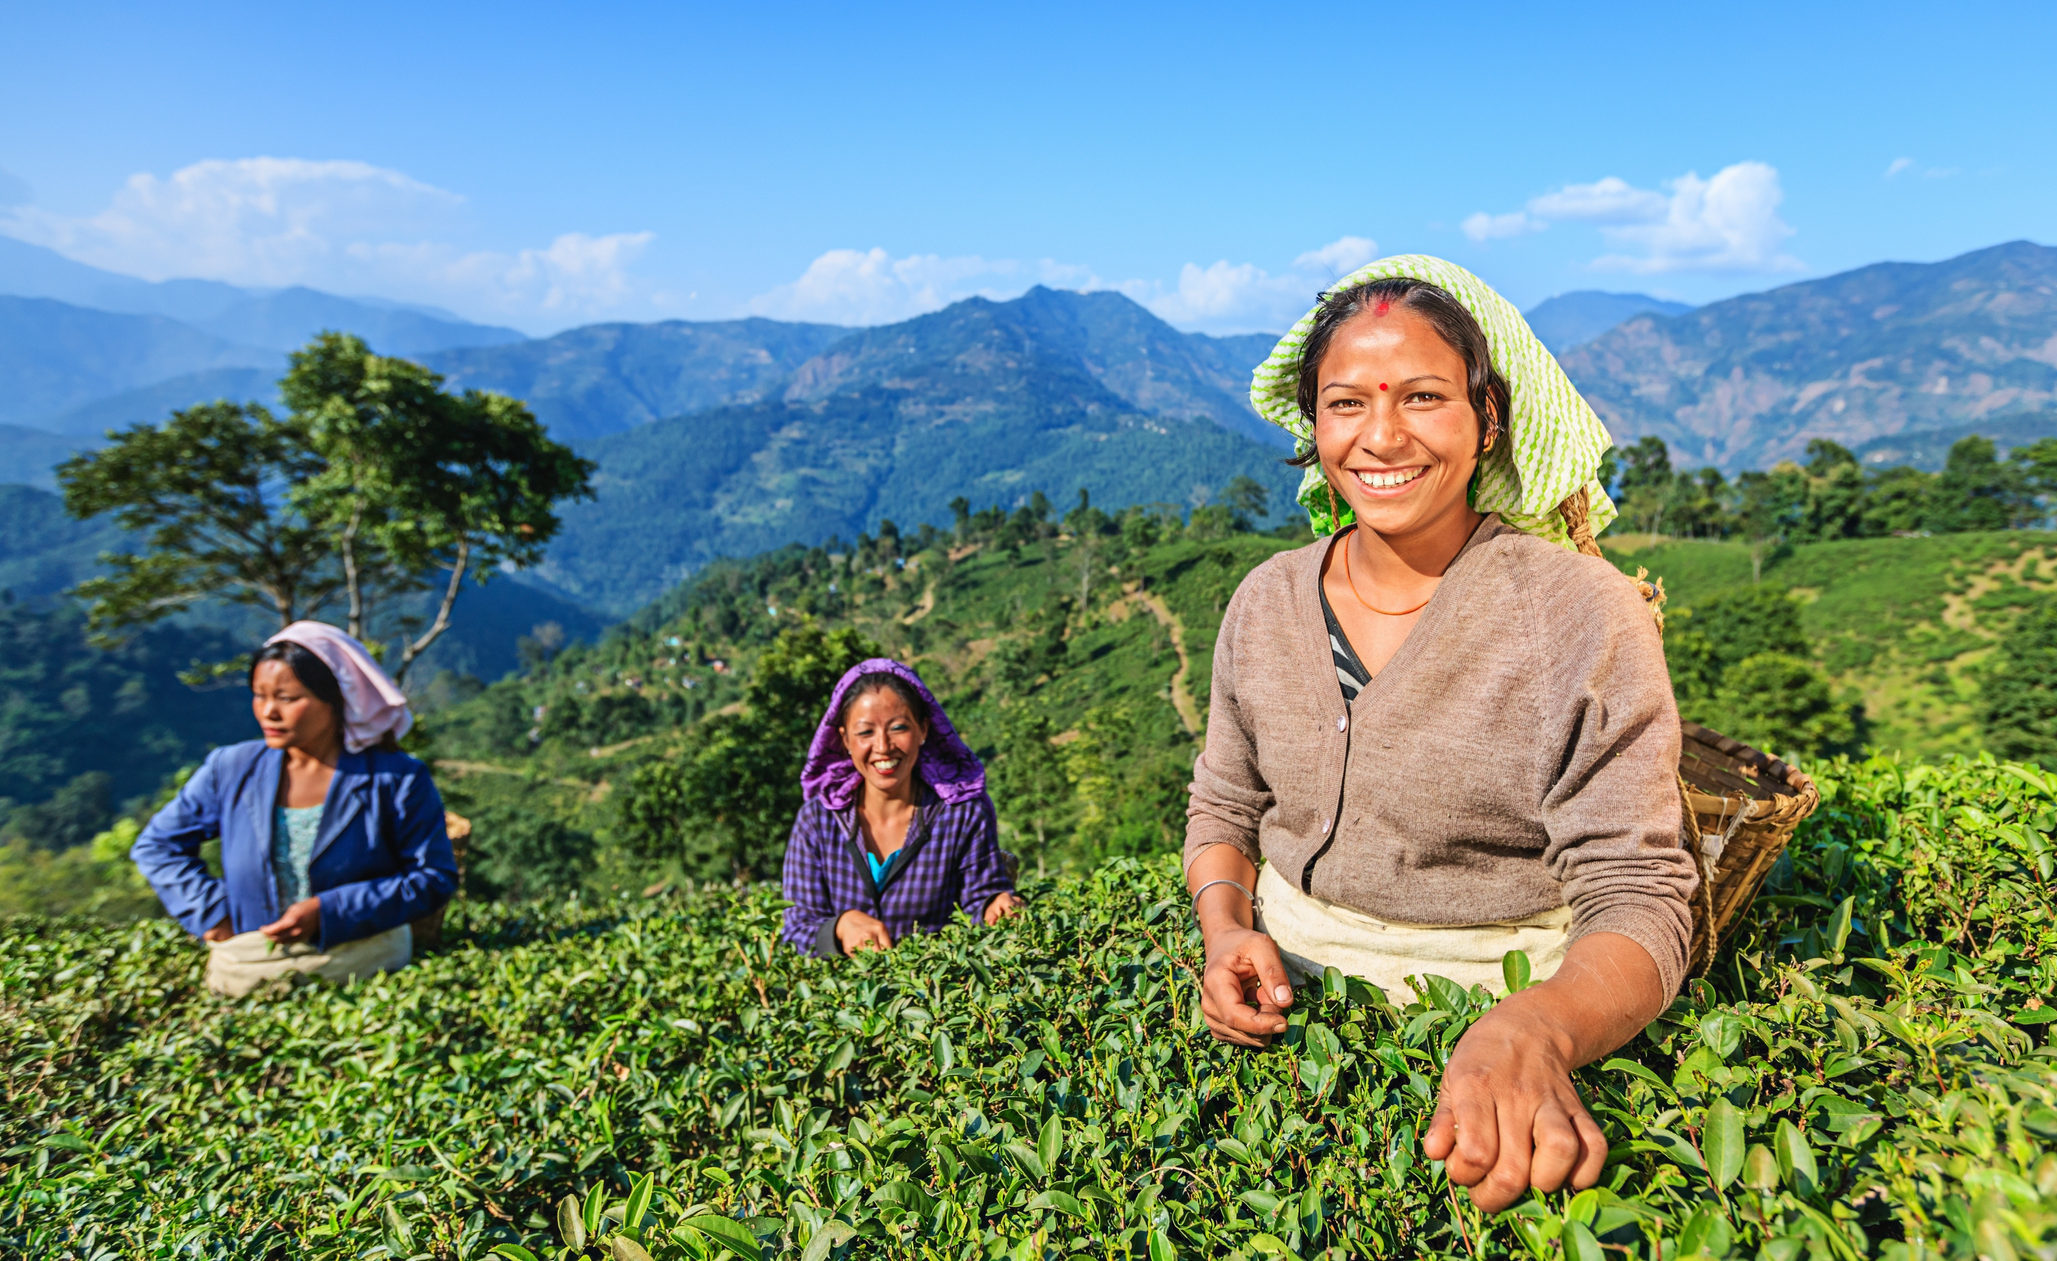 Meet friendly Indian locals like these tea pickers in Darjeeling when you take a tailor-made holiday with Alfred&.